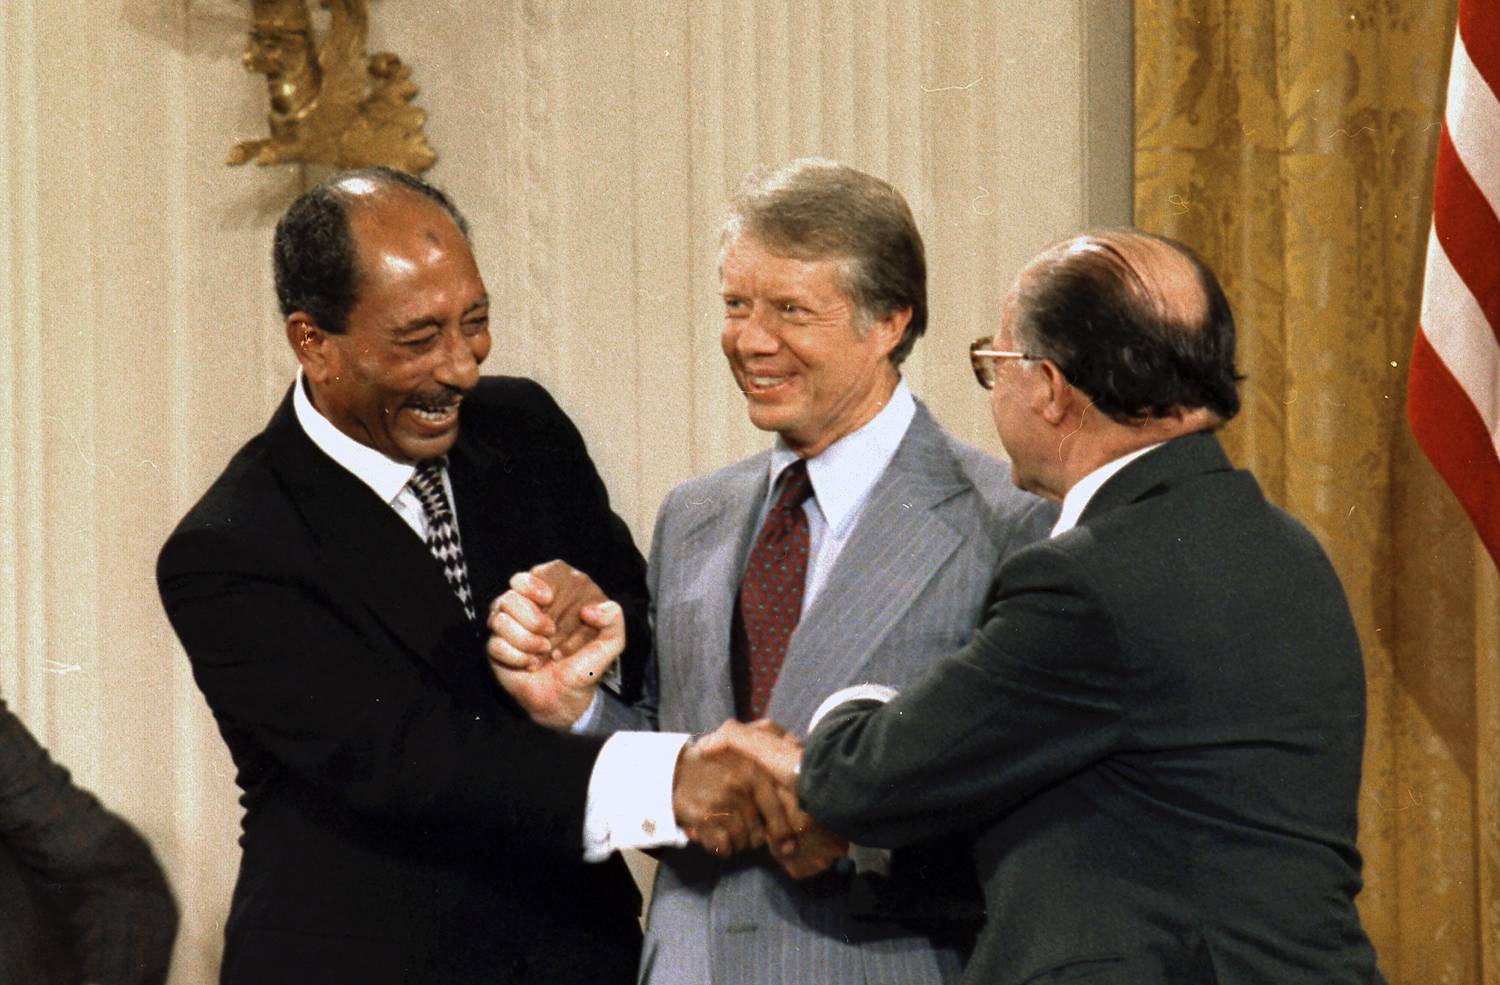 Egyptian President Anwar Sadat, U.S. President Jimmy Carter, and Israeli Prime Minister Menachem Begin shake hands at the conclusion of the Camp David Peace Accords signing ceremony. US National Archives and Records Administration CC